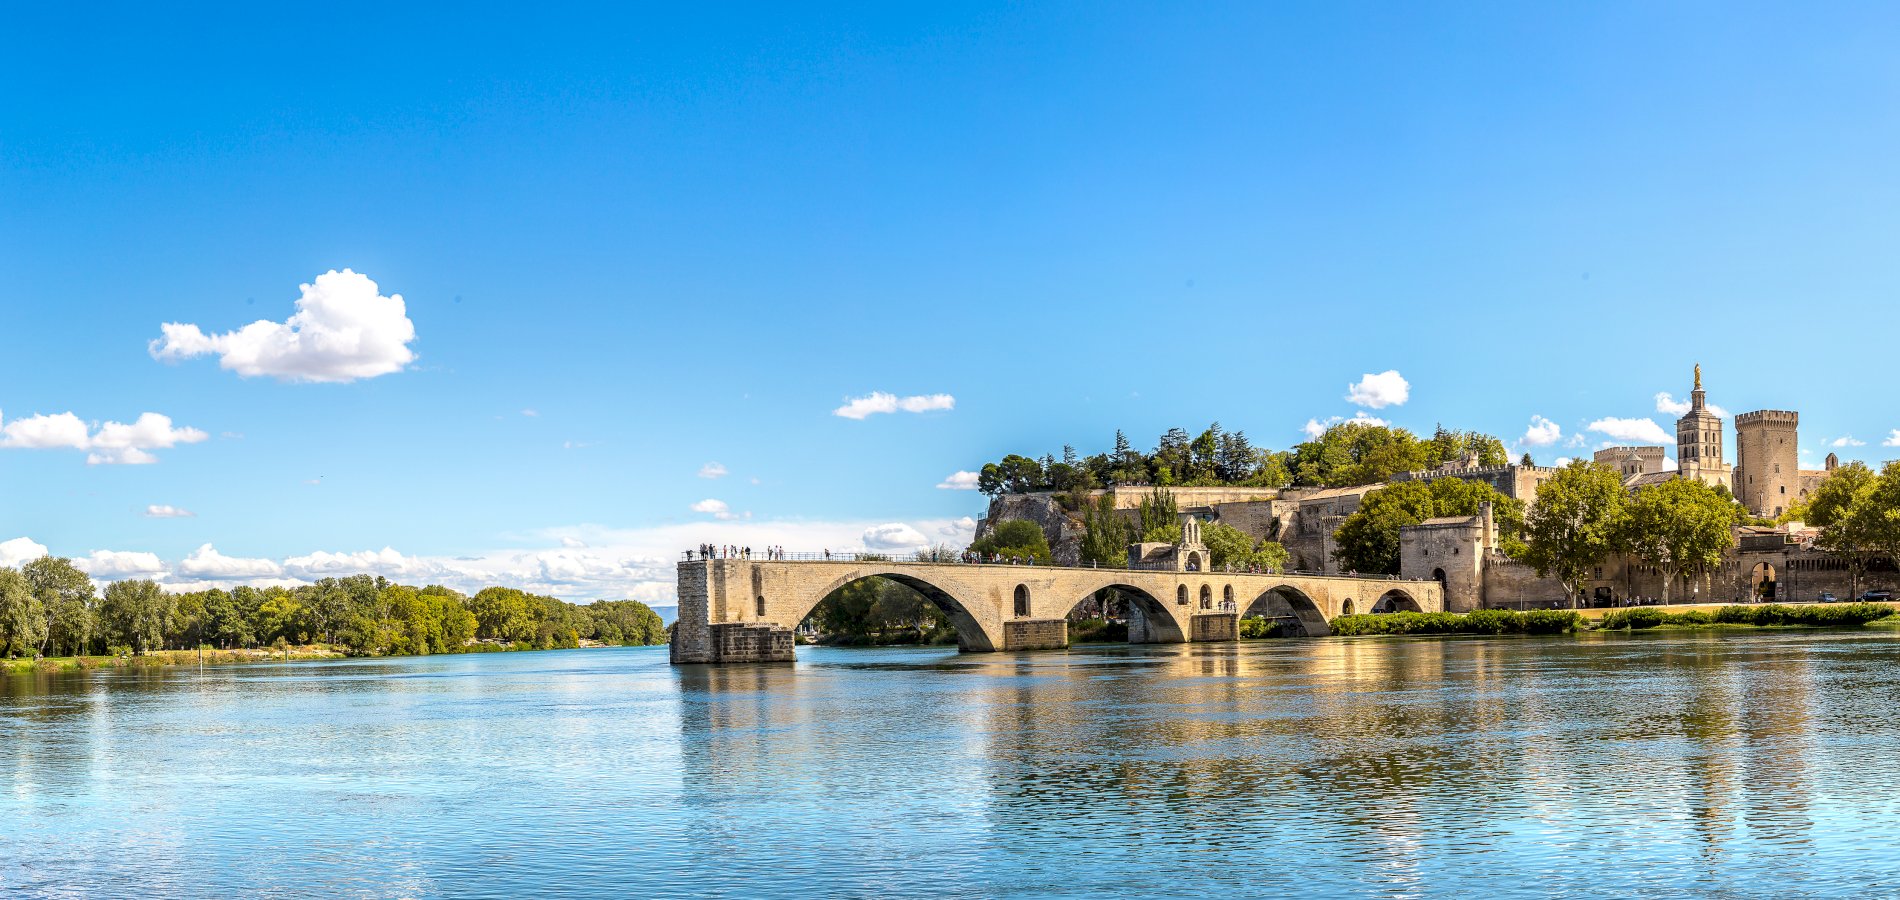 Ophorus Tours - A Private Day Trip from Aix en Provence to Avignon & Luberon Villages